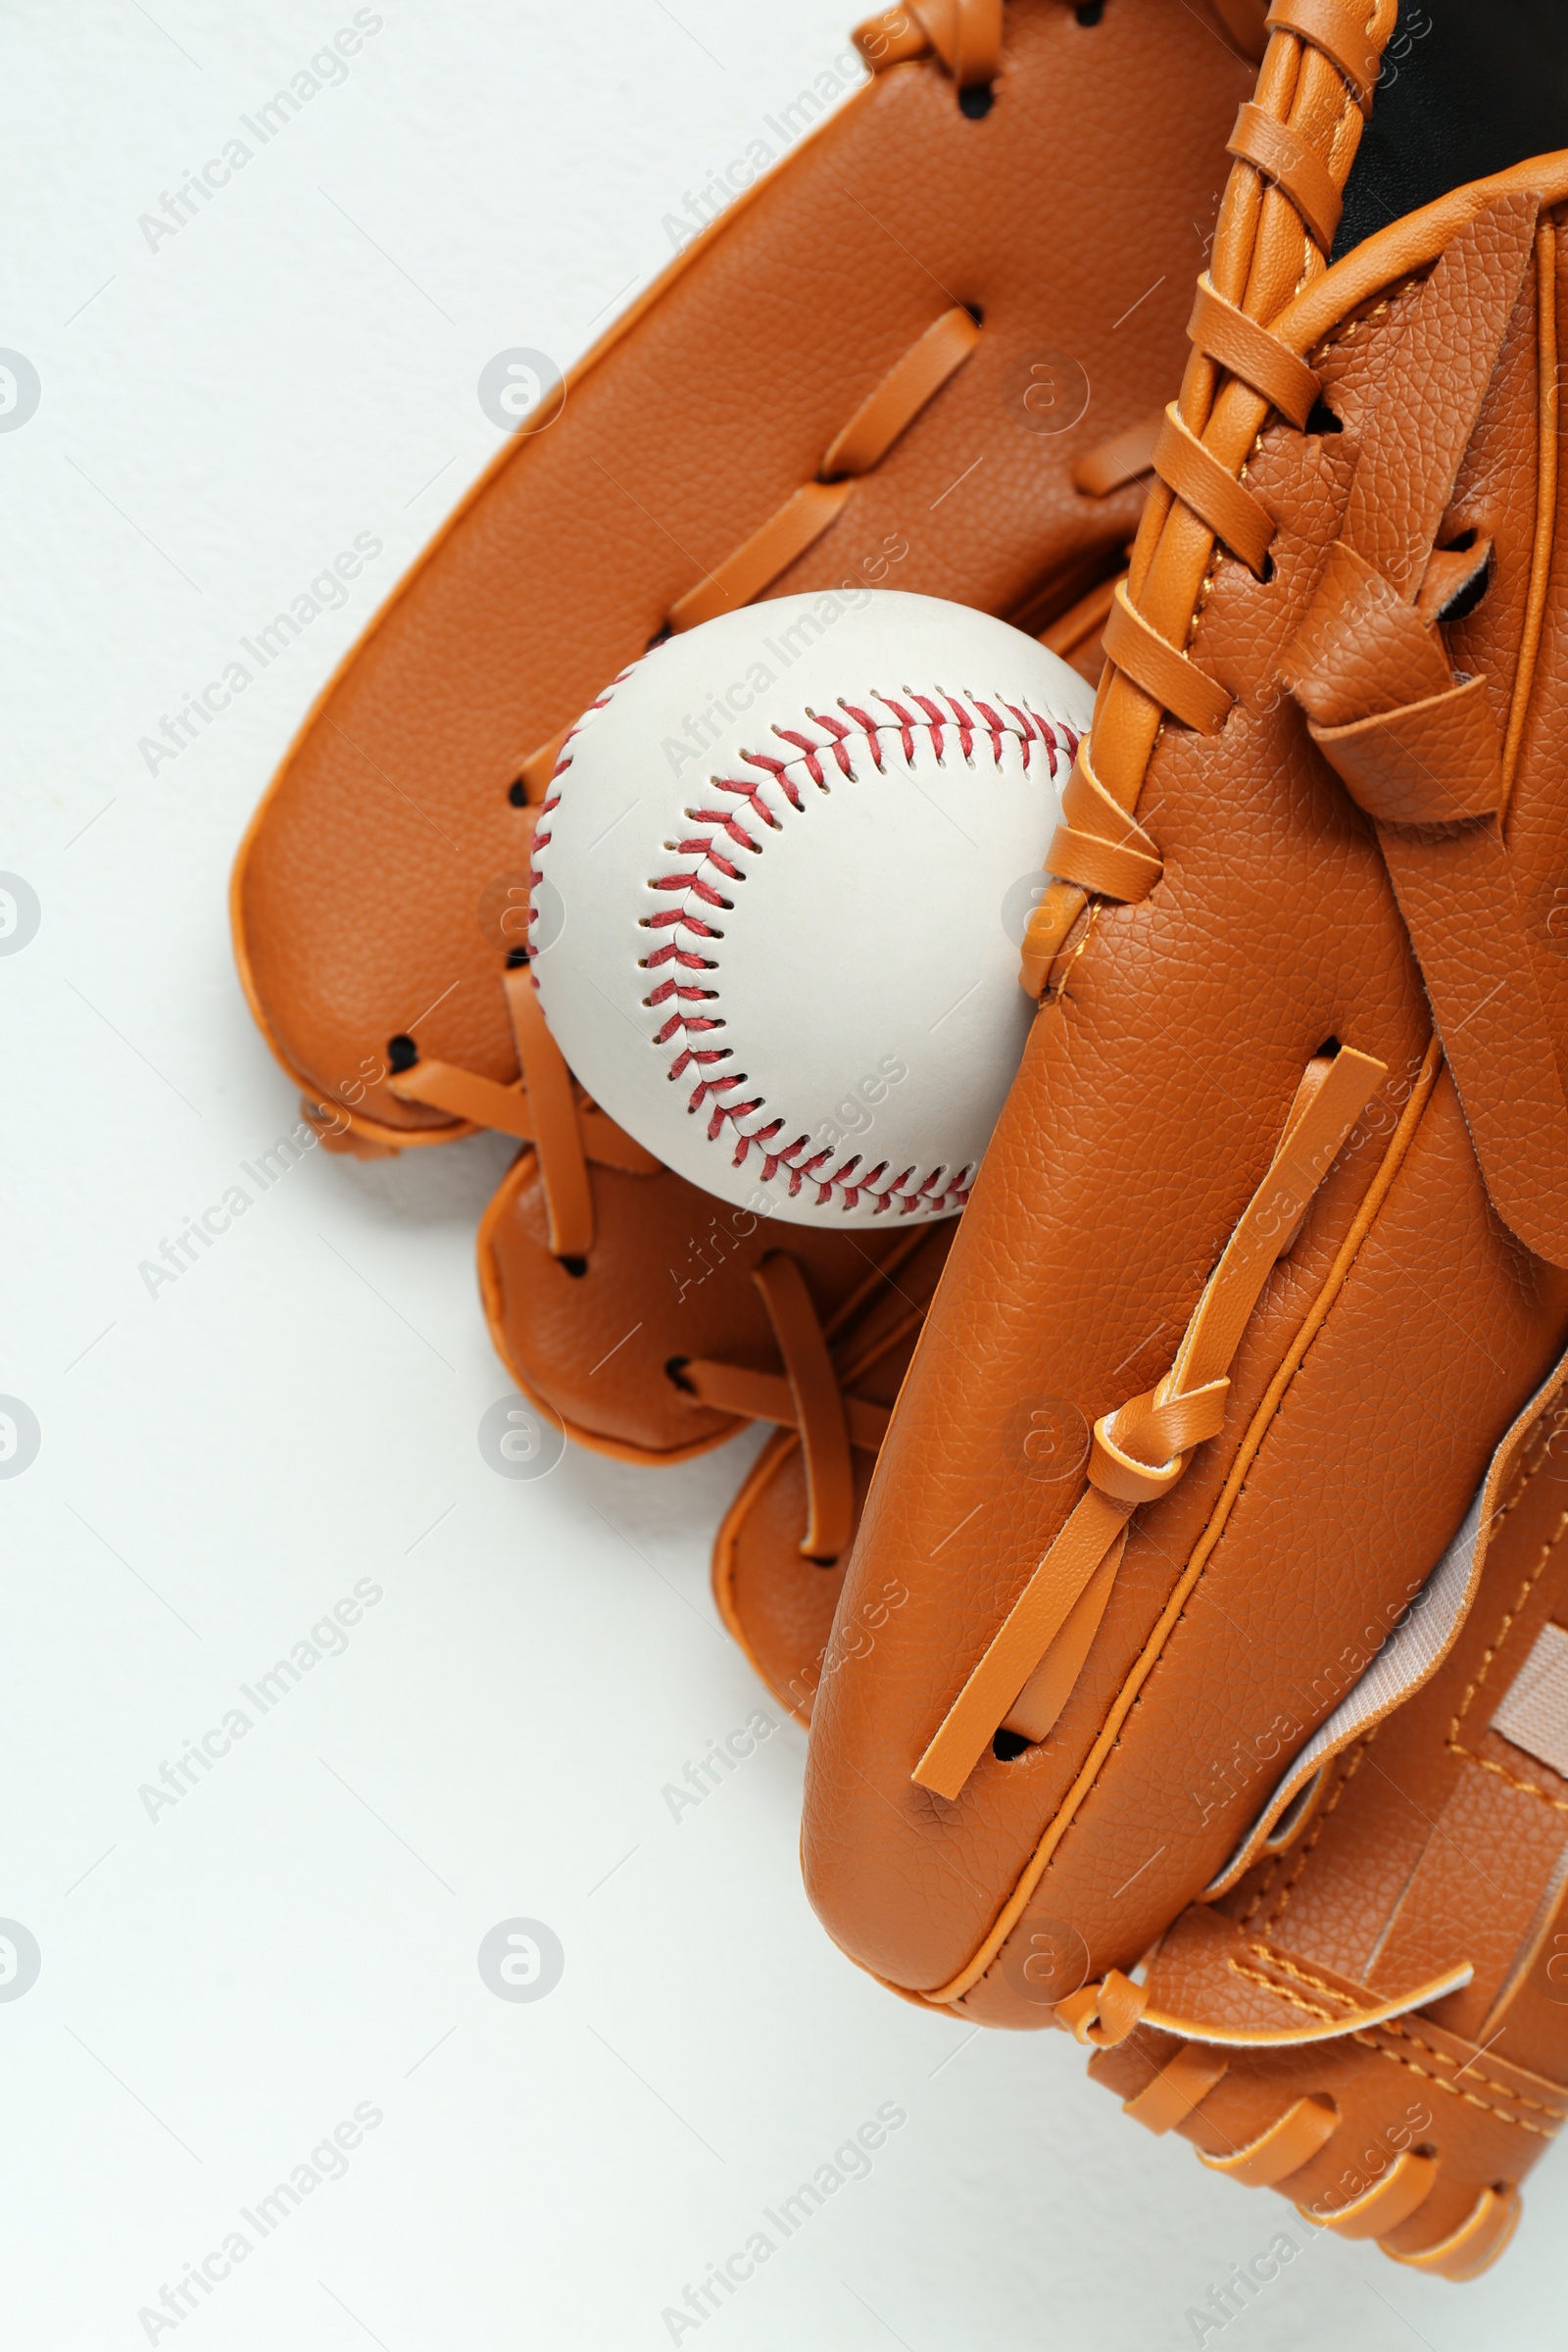 Photo of Catcher's mitt and baseball ball on white background, top view. Sports game